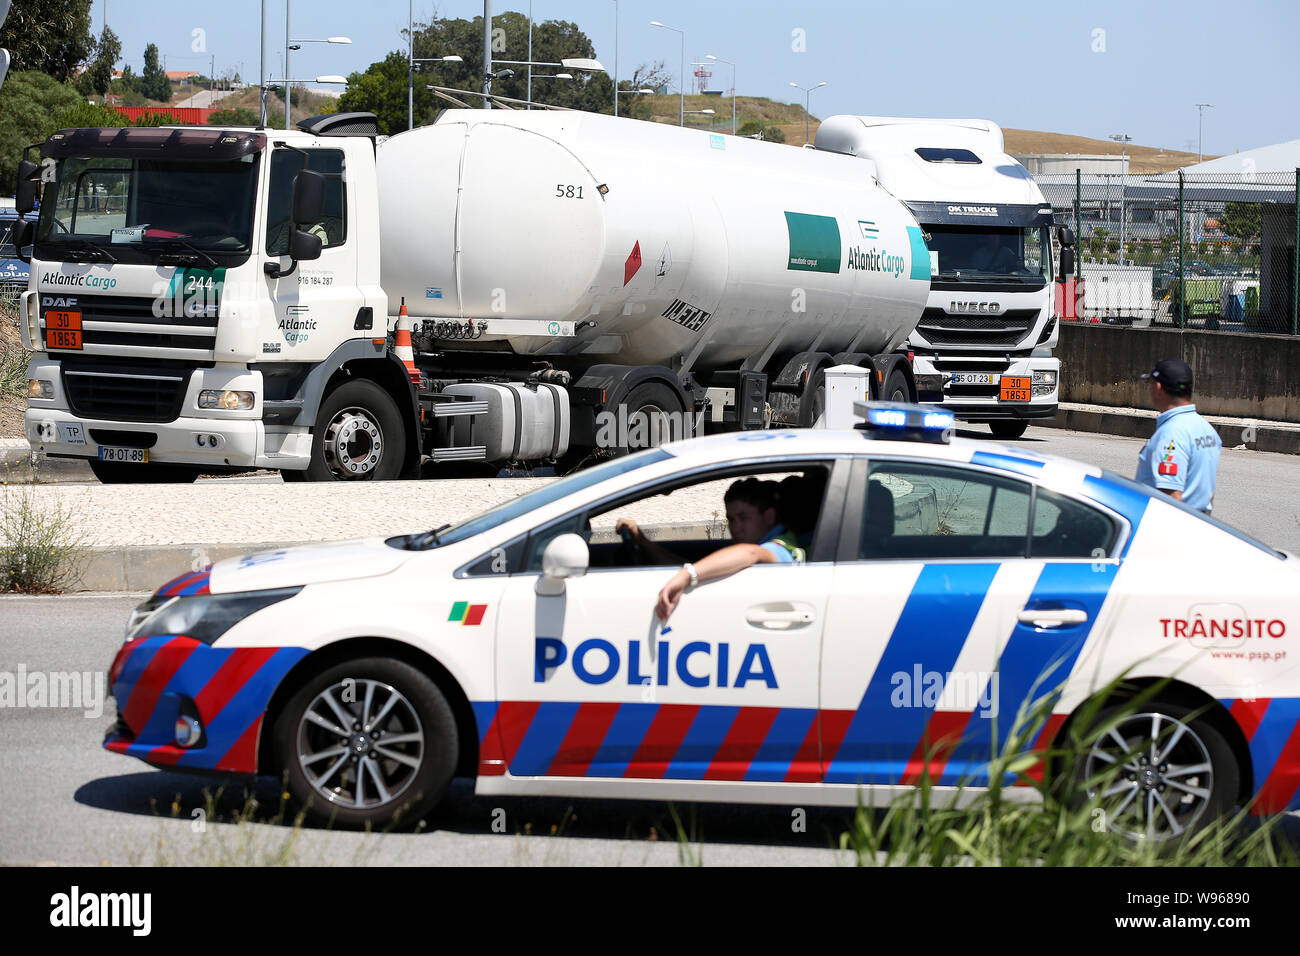 Lisbon, Portugal. 12th Aug, 2019. Police officers escort fuel-tankers leaving the Humberto Delgado Airport in Lisbon, Portugal, on Aug. 12, 2019. Portuguese fuel-tanker drivers' national strike began as scheduled since Monday for an indefinite period. Portugal's government has ordered minimum services of between 50 percent and 100 percent and has declared an energy crisis, which implies 'exceptional measures' to minimize the effects of strike to ensure the provision of essential services such as security forces and medical emergencies. Credit: Pedro Fiuza/Xinhua Stock Photo